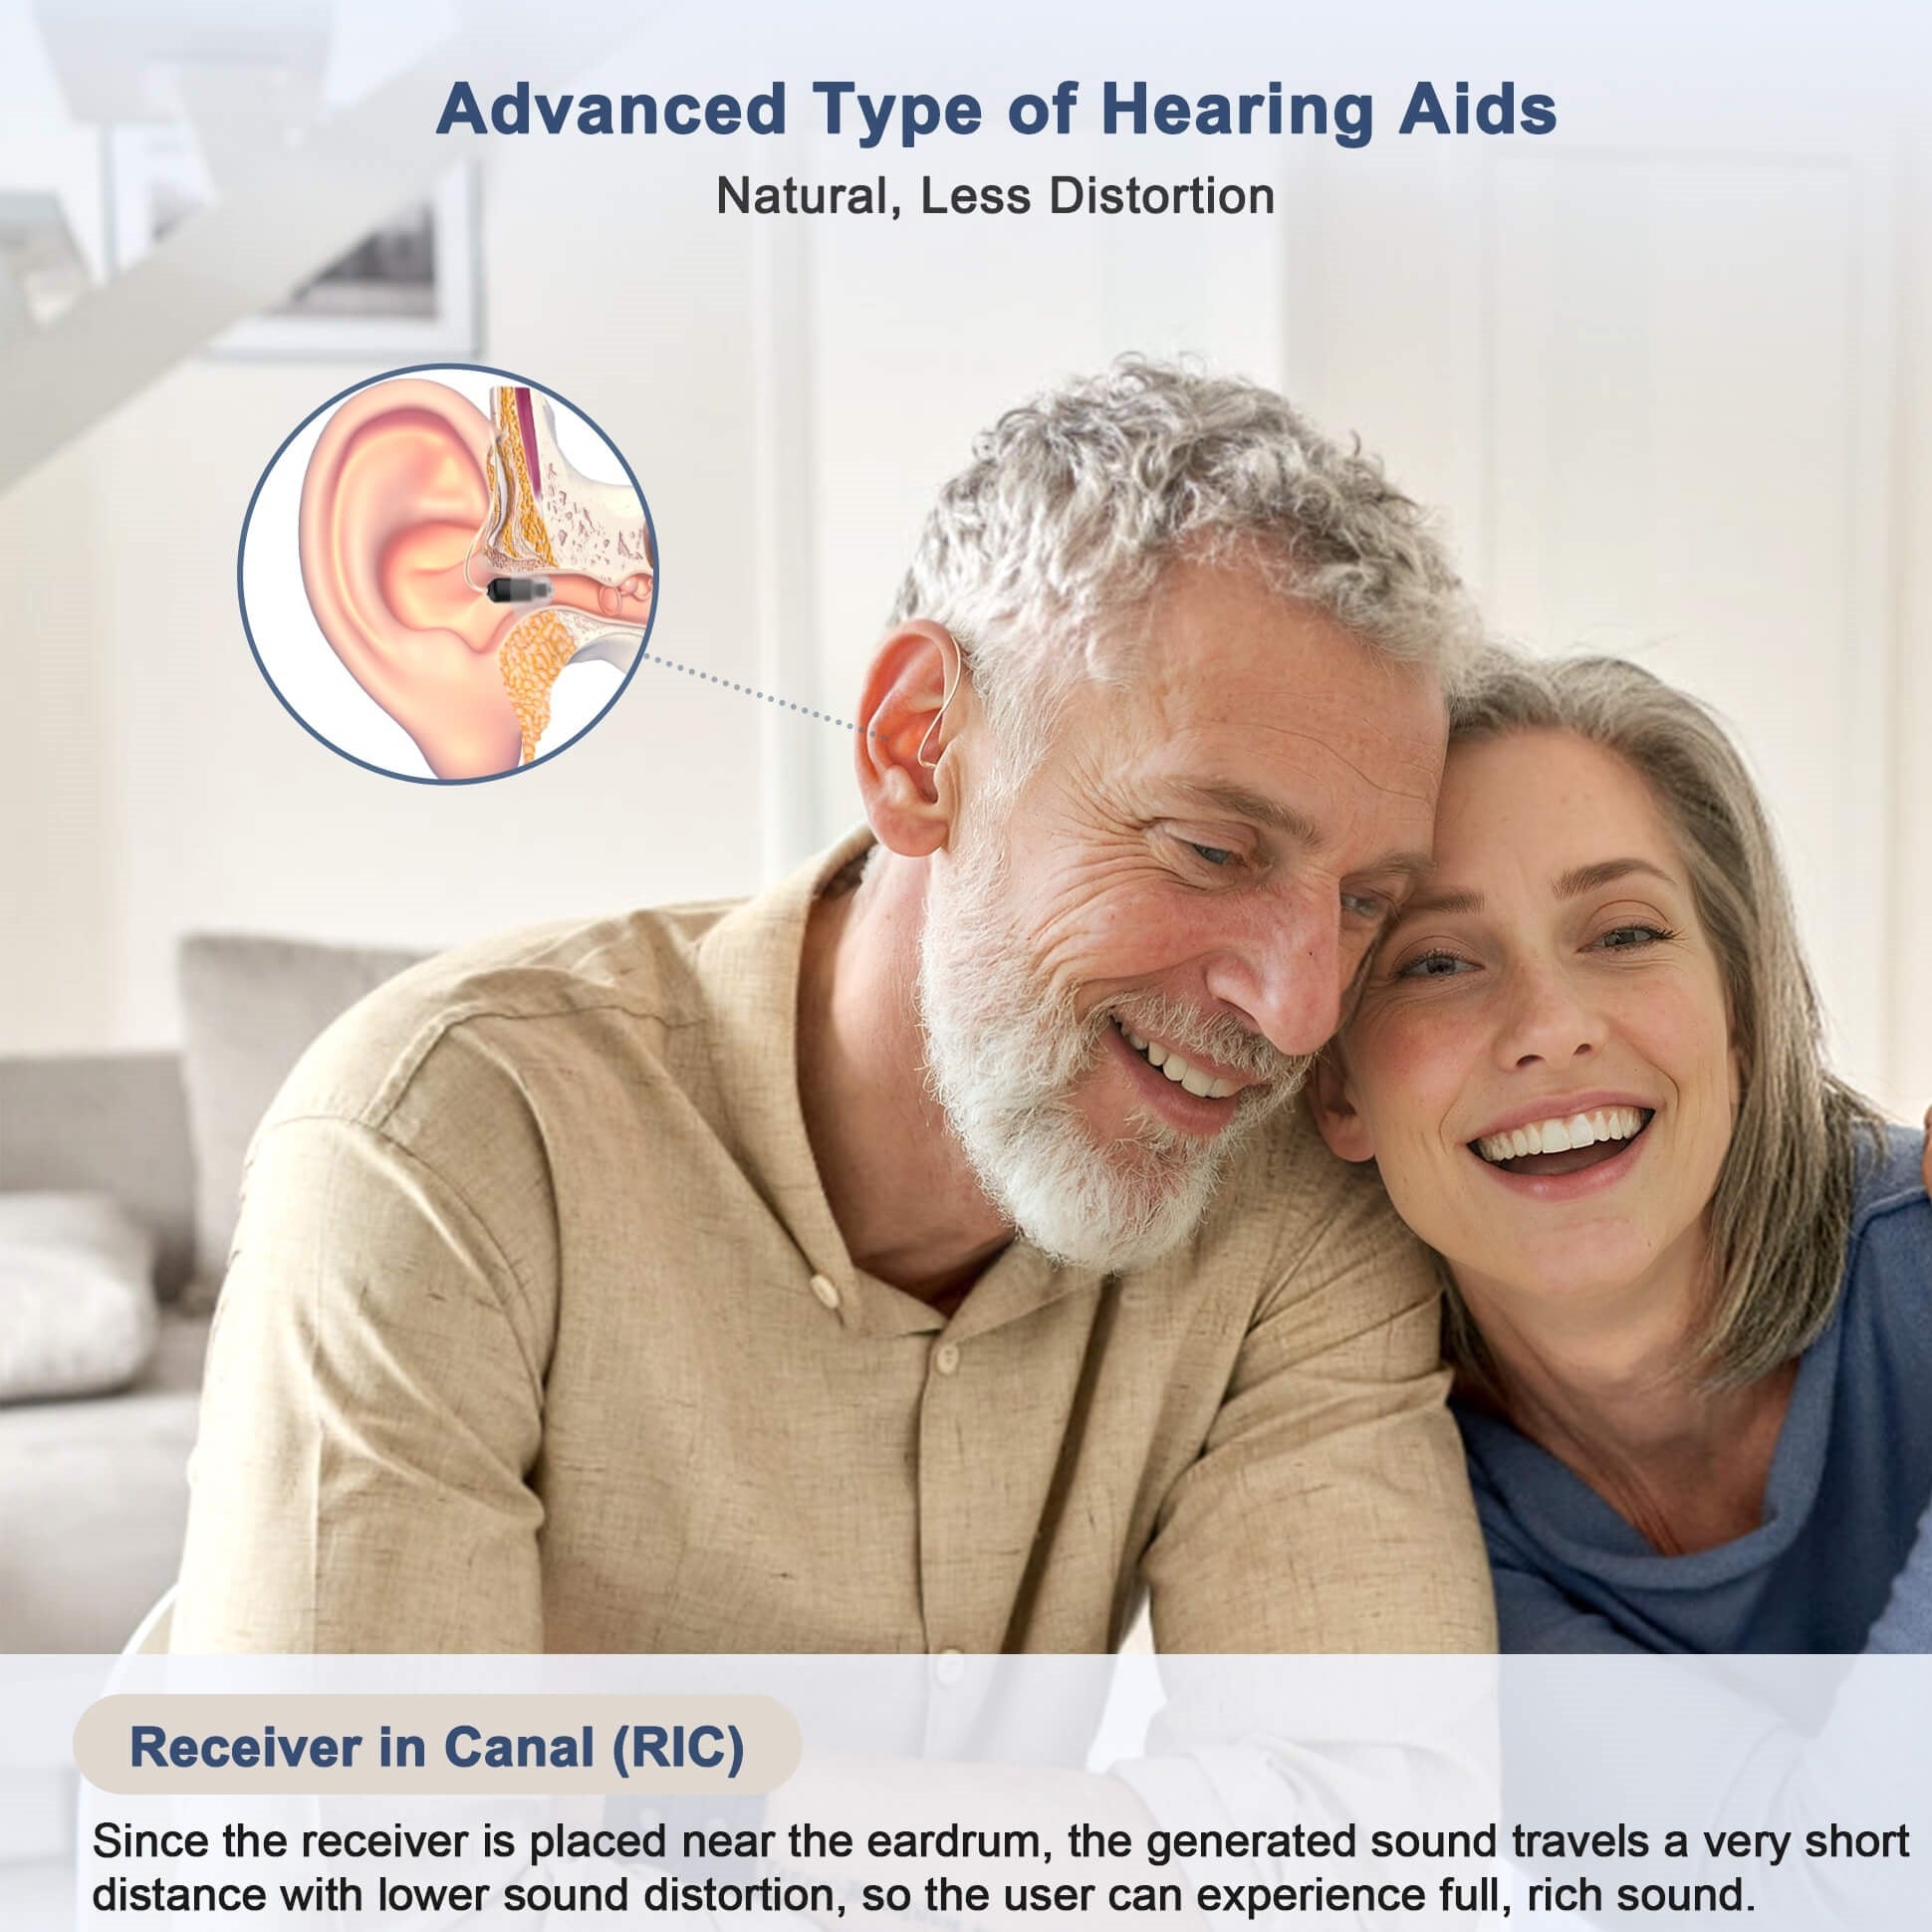 Best Hearing Aids for Tinnitus - Vivtone Lucid516 RIC-a2: In Ear Design, Medical Grade, Top Rated Hearing Aids